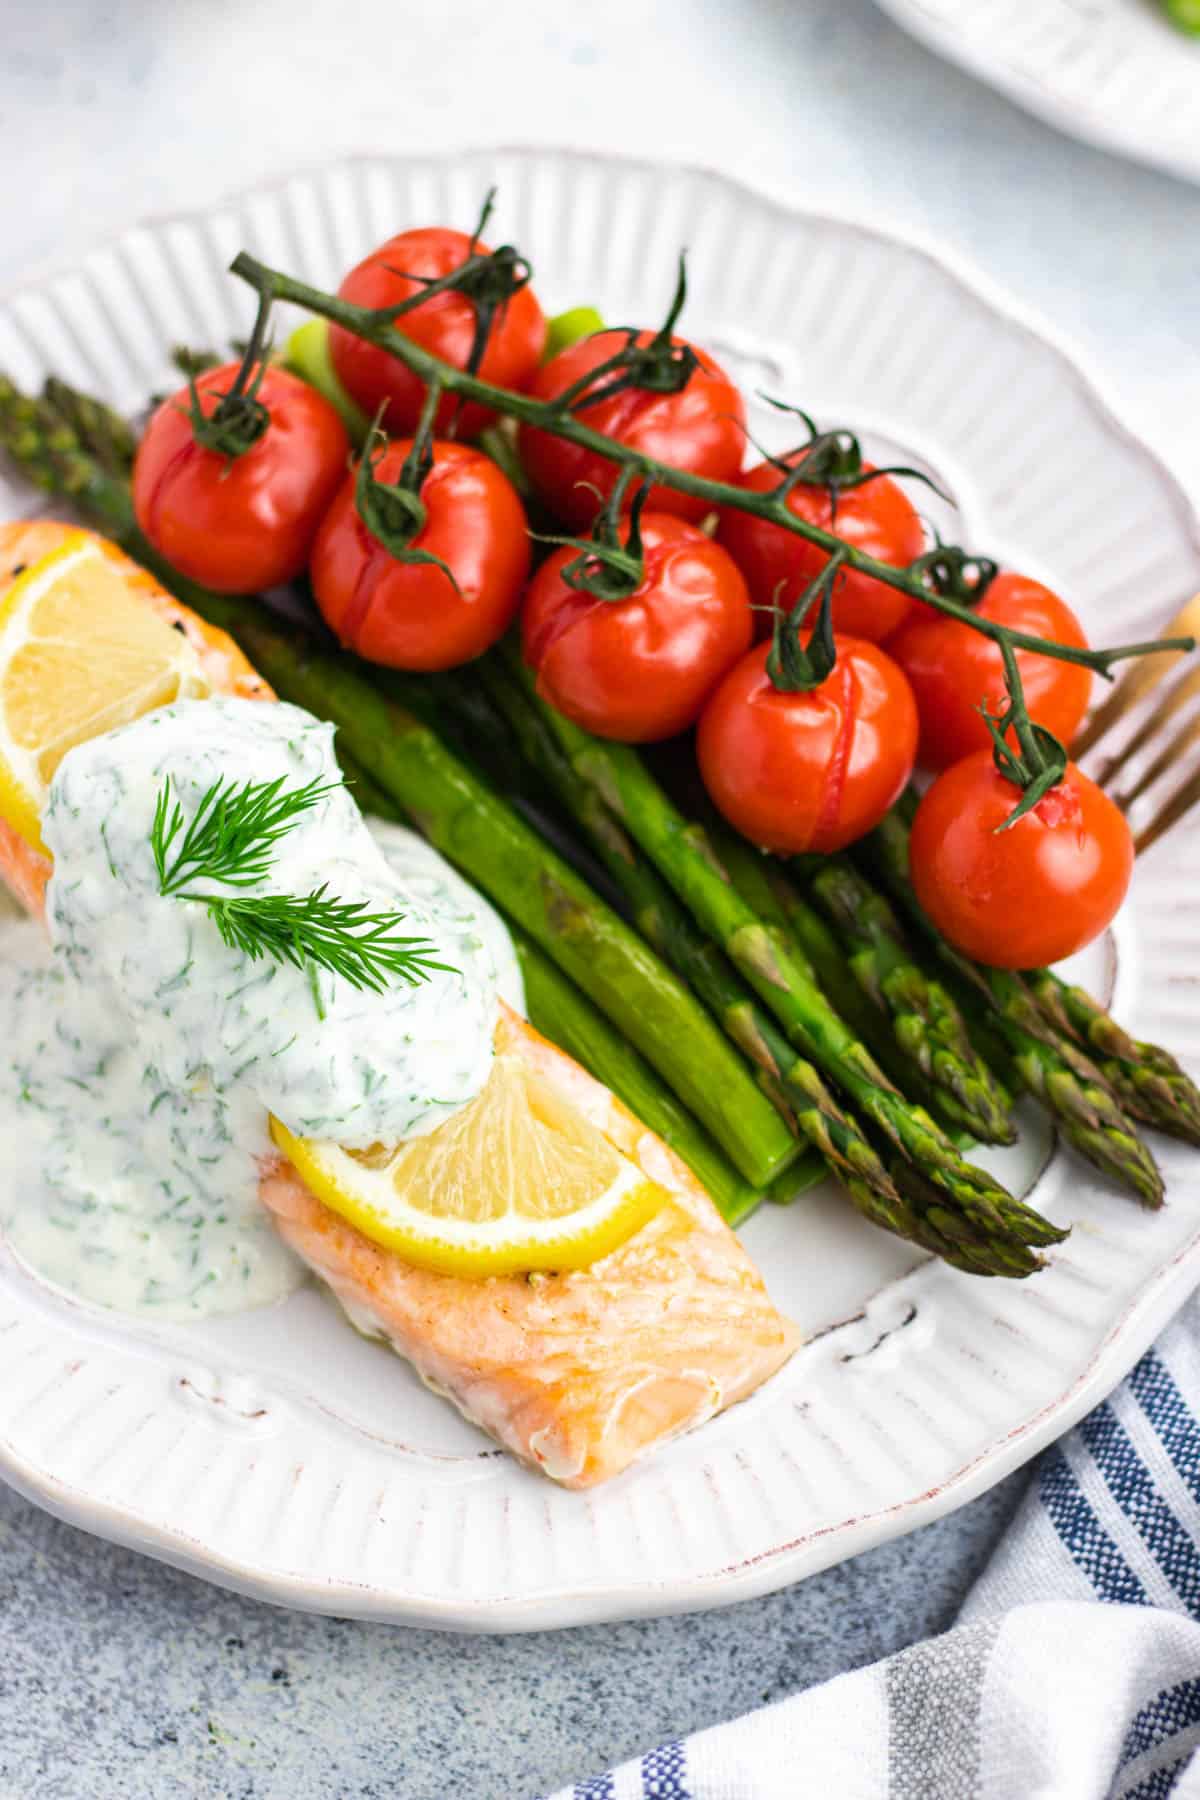 A piece of baked salmon, topped with lemon slices and creamy dill sauce, with asparagus and tomatoes on the side.